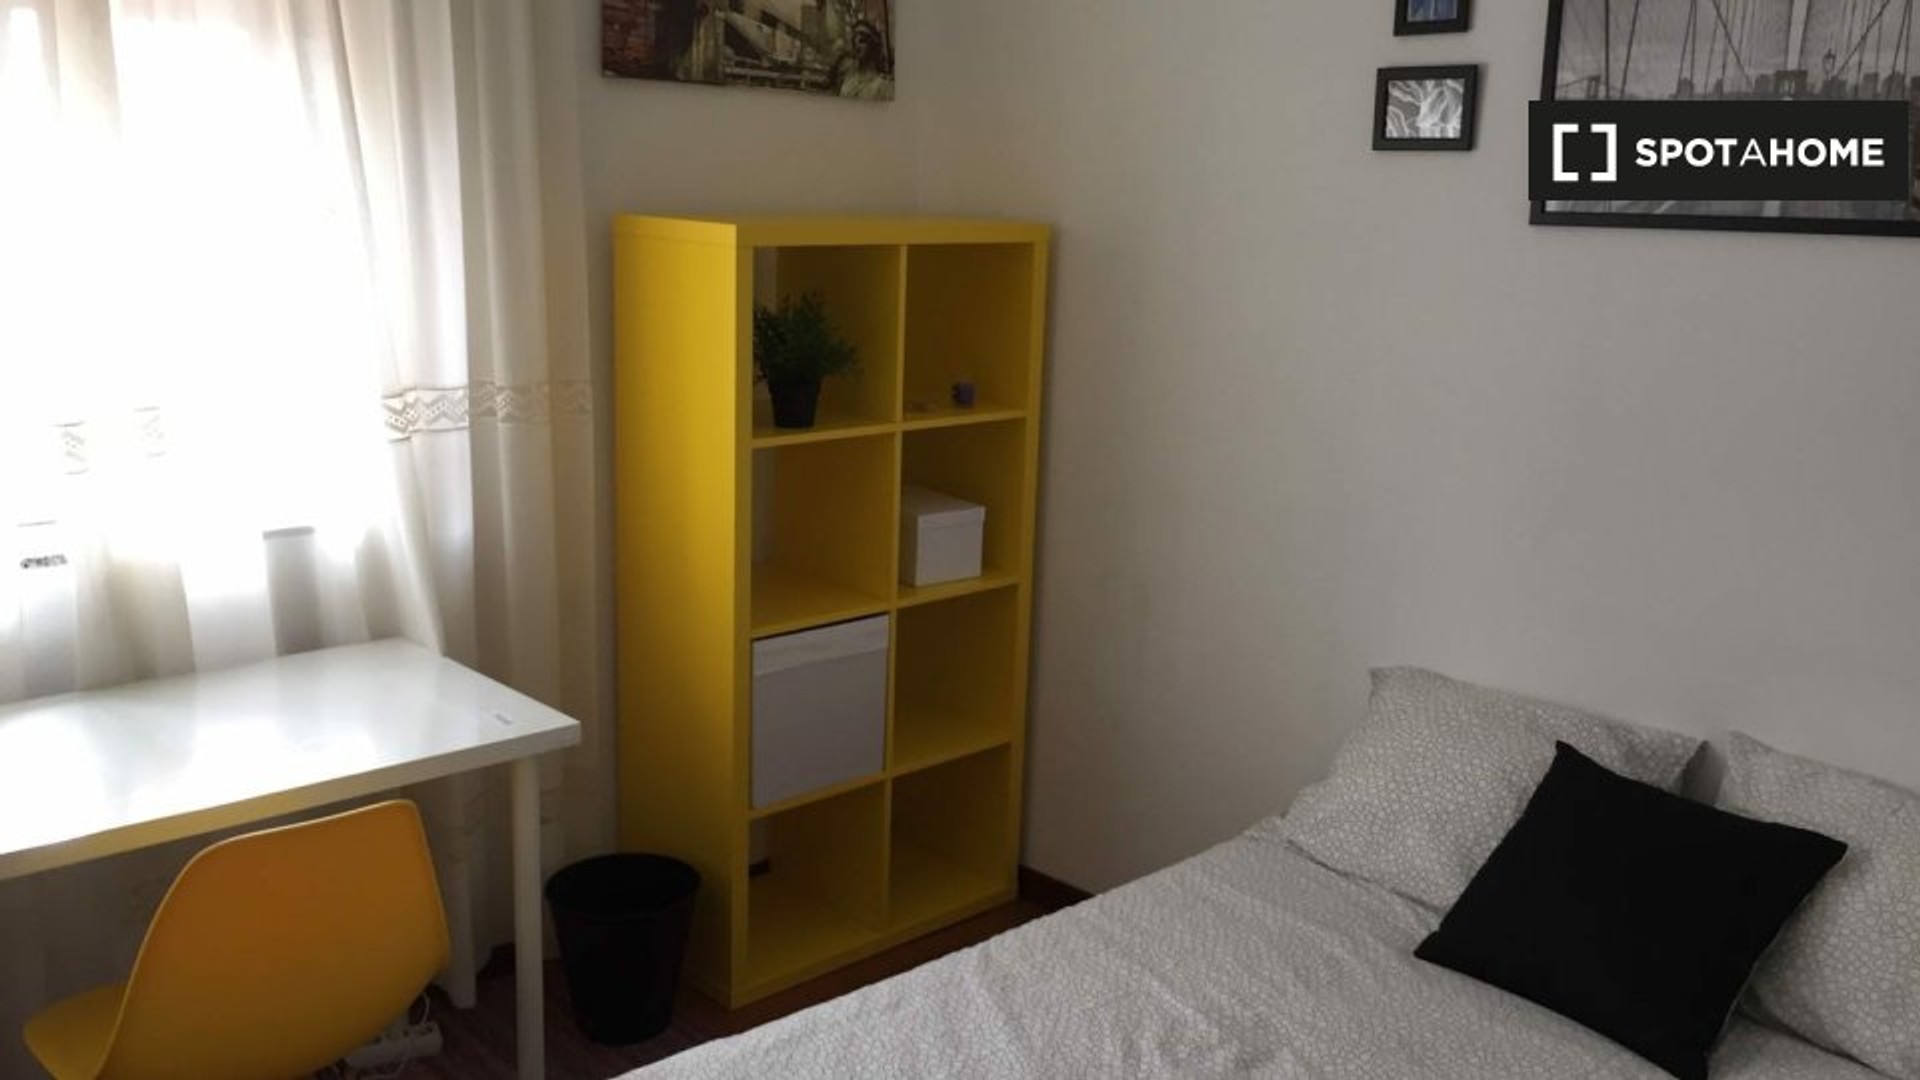 Renting rooms by the month in Santiago De Compostela